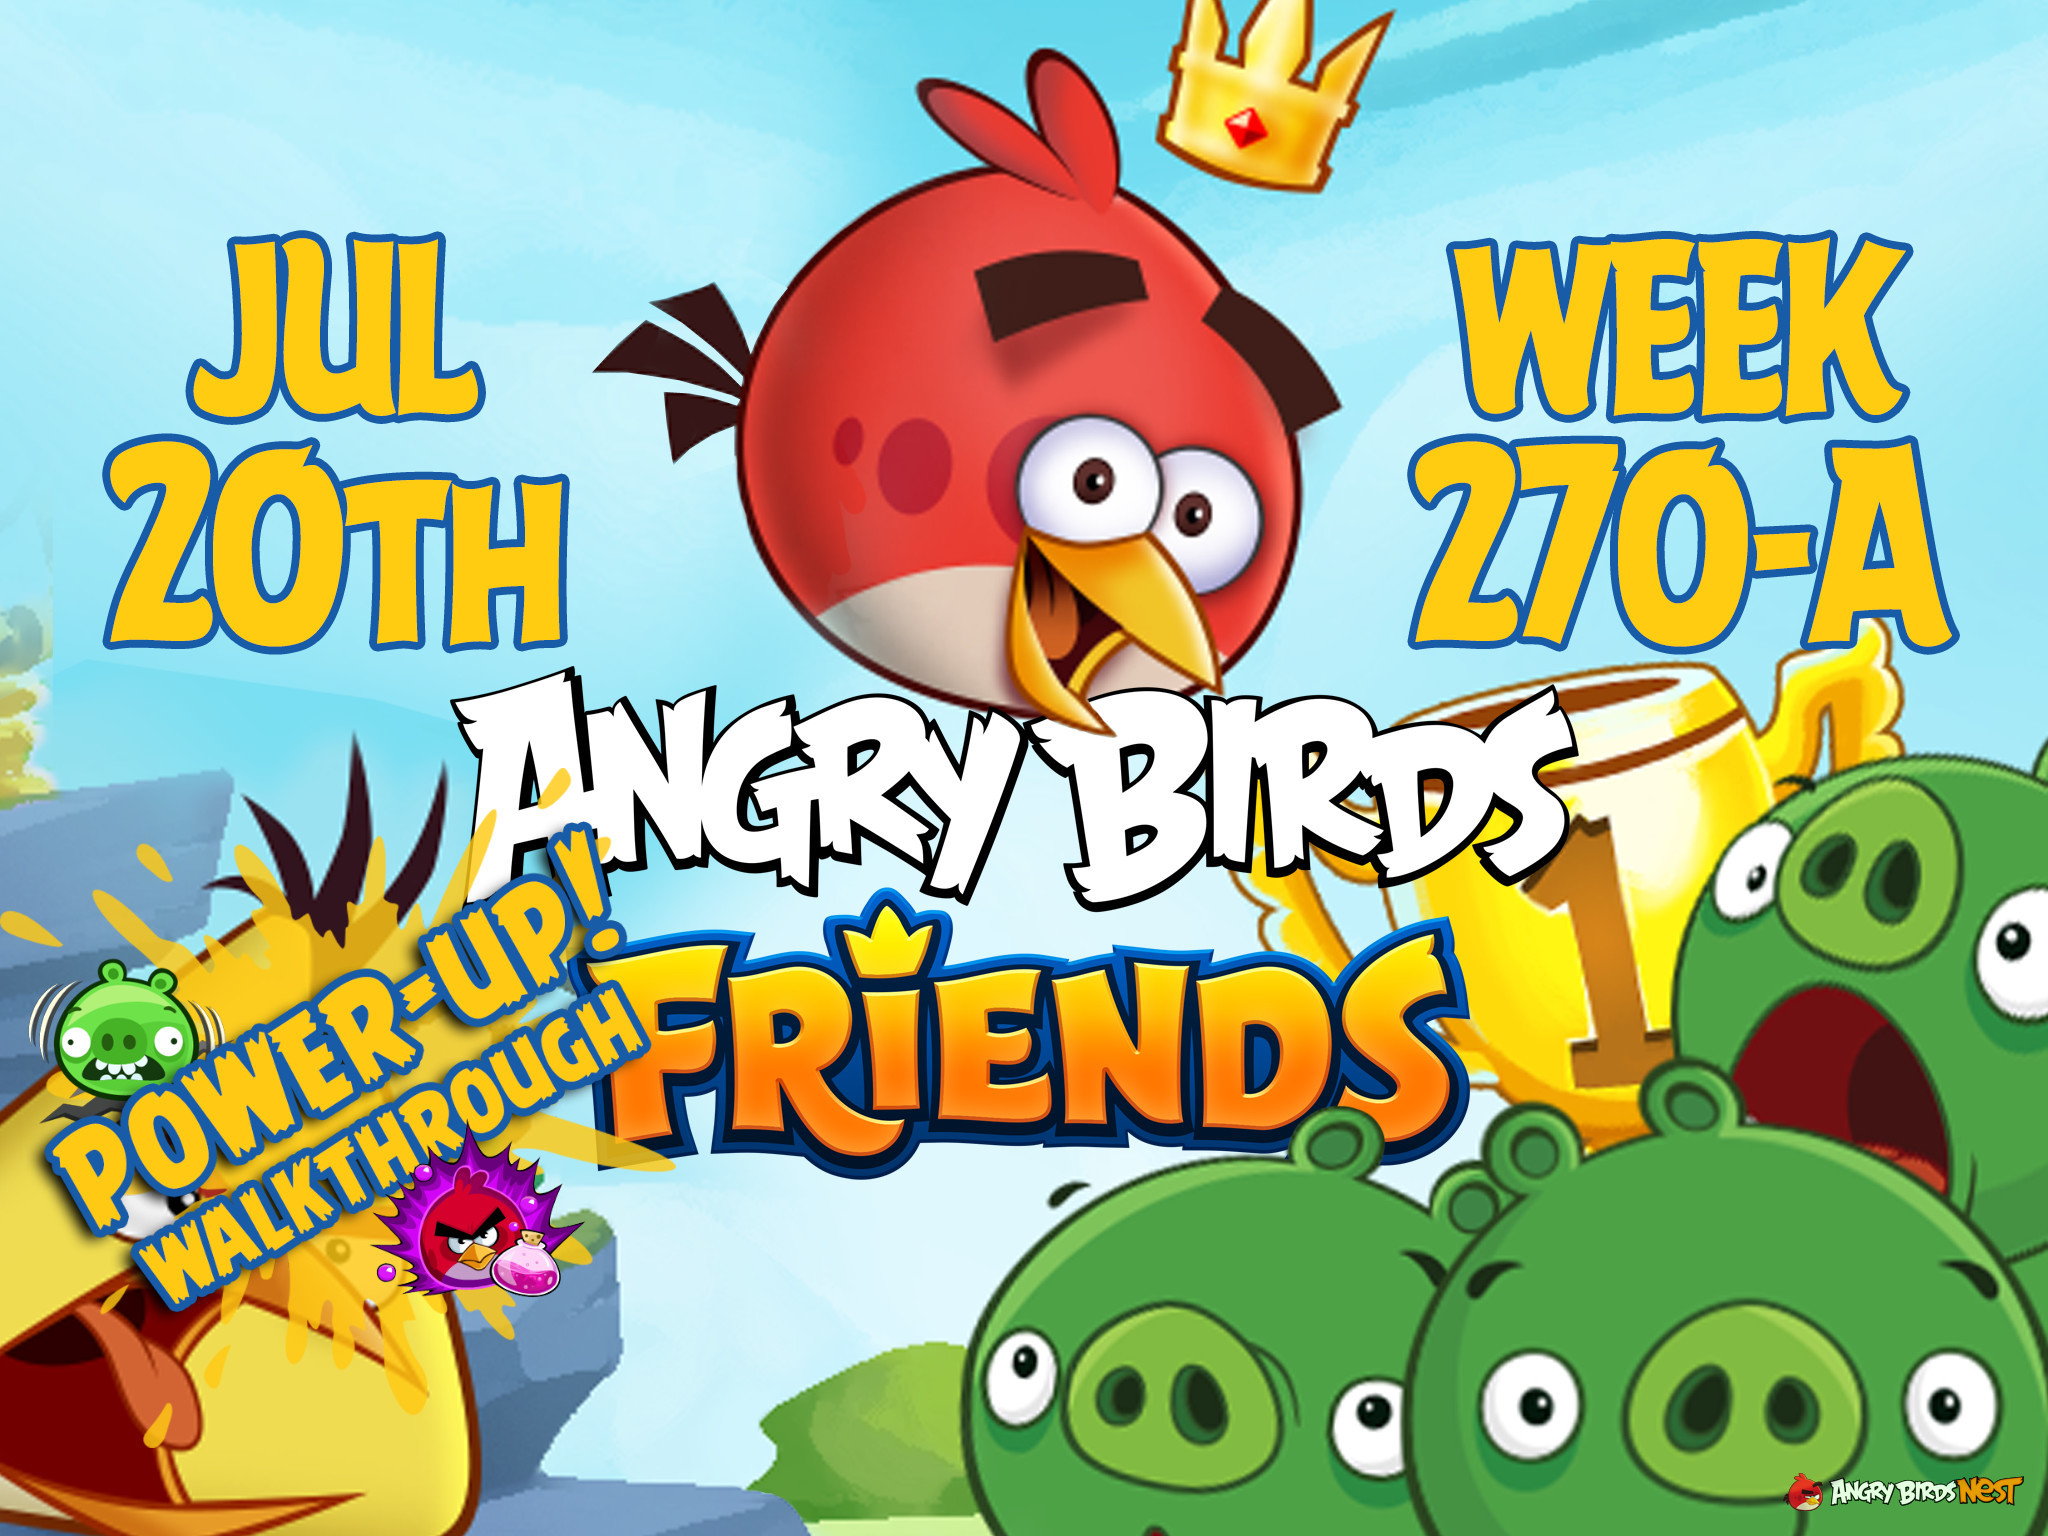 Angry Birds Friends Tournament Week 270-A Feature Image PU